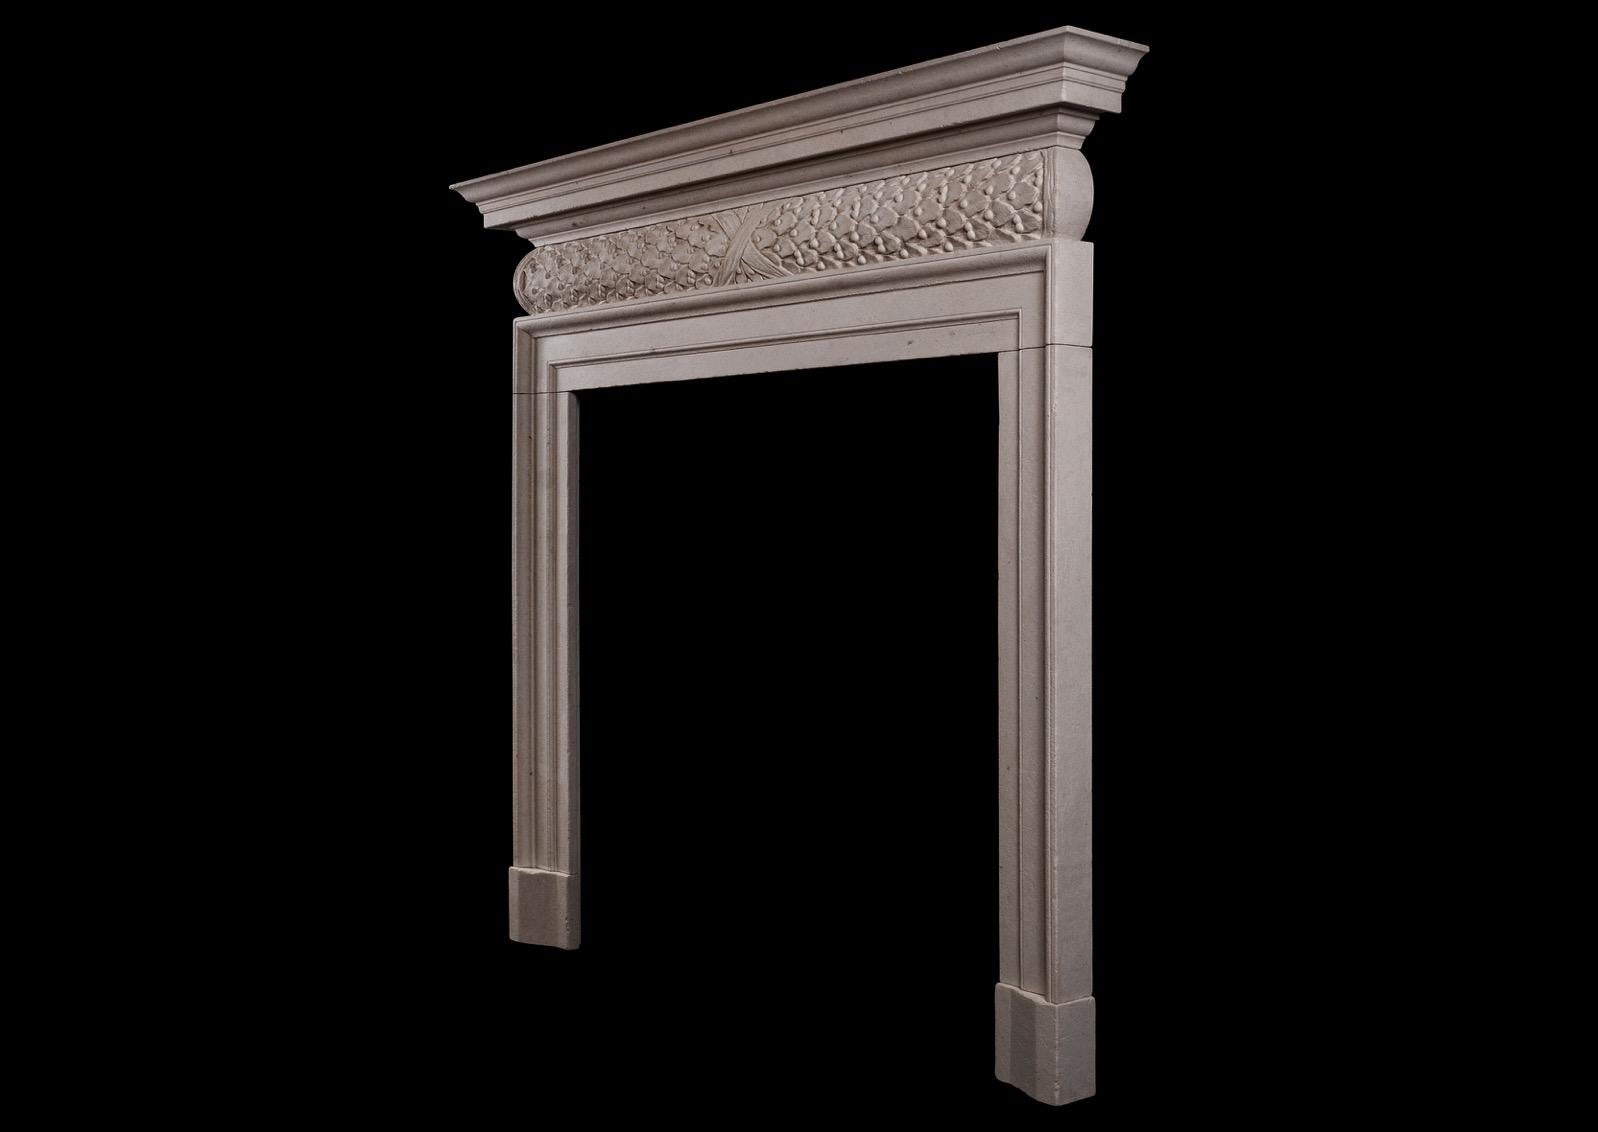 English Mid-18th Century Style Antiqued Limestone Fireplace For Sale